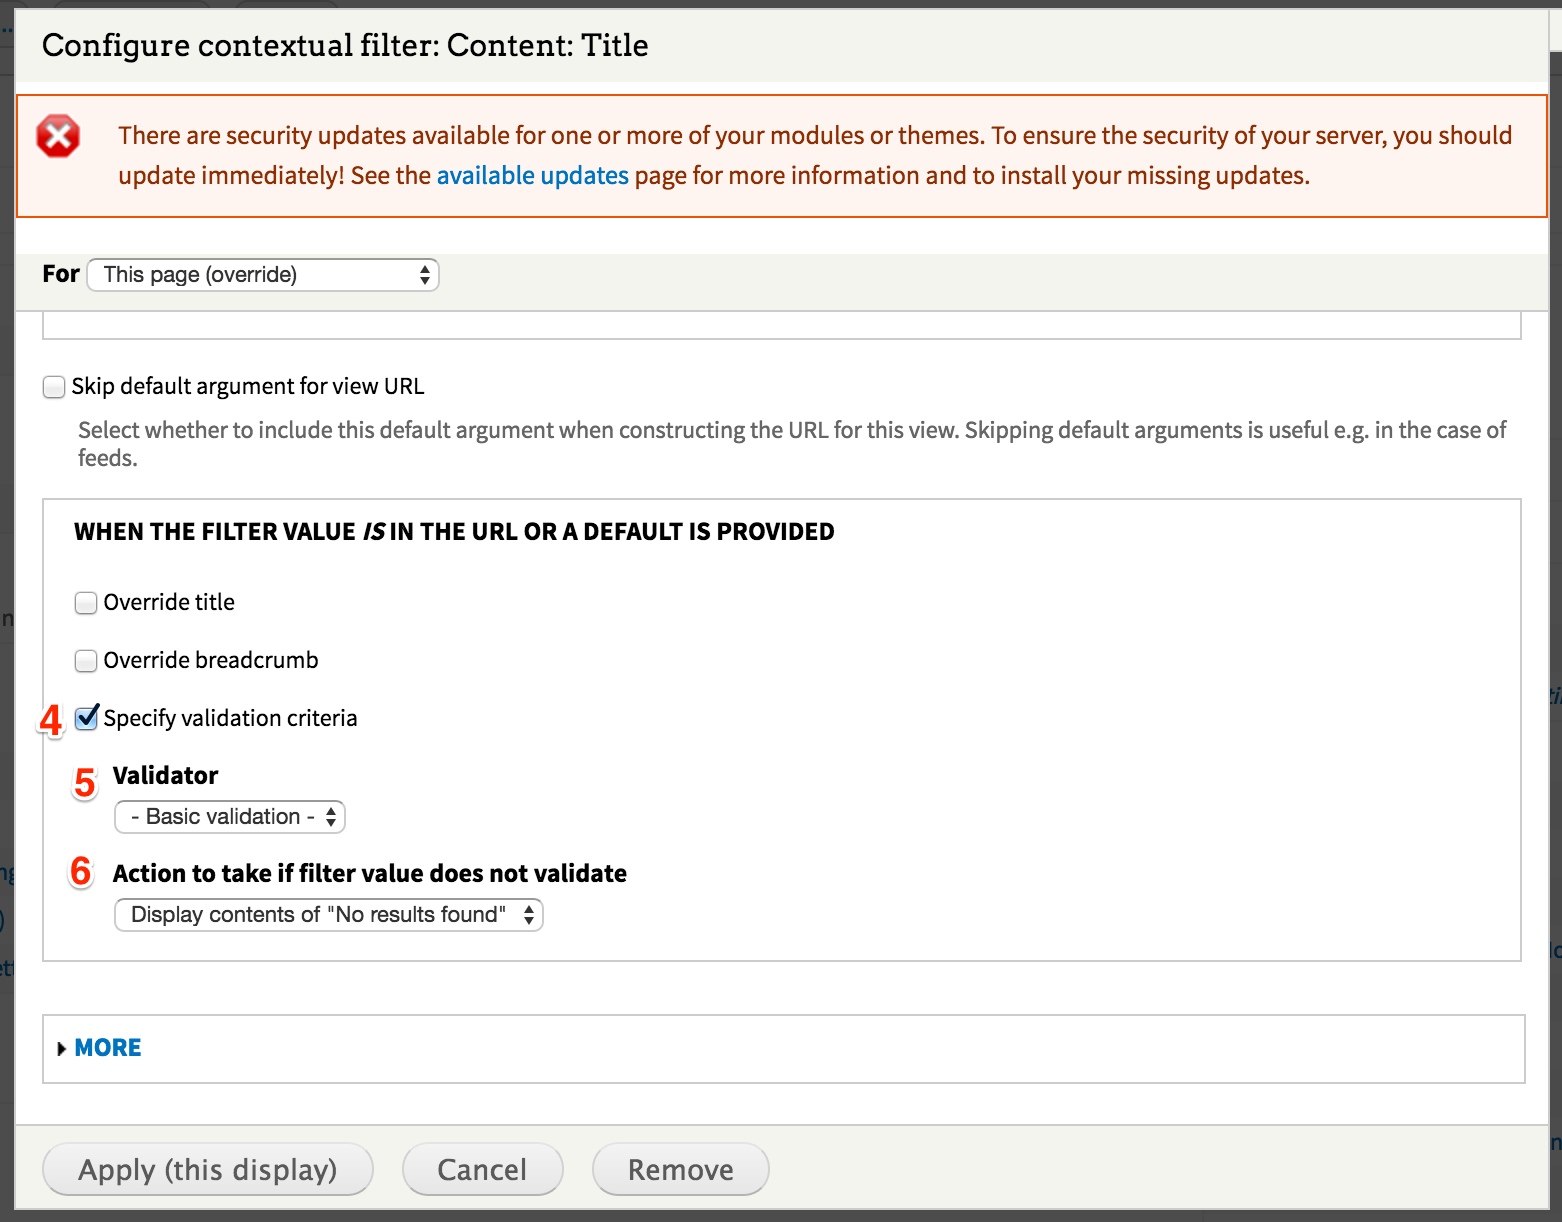 Screenshot for steps 4-6 of setting up the contextual filter.